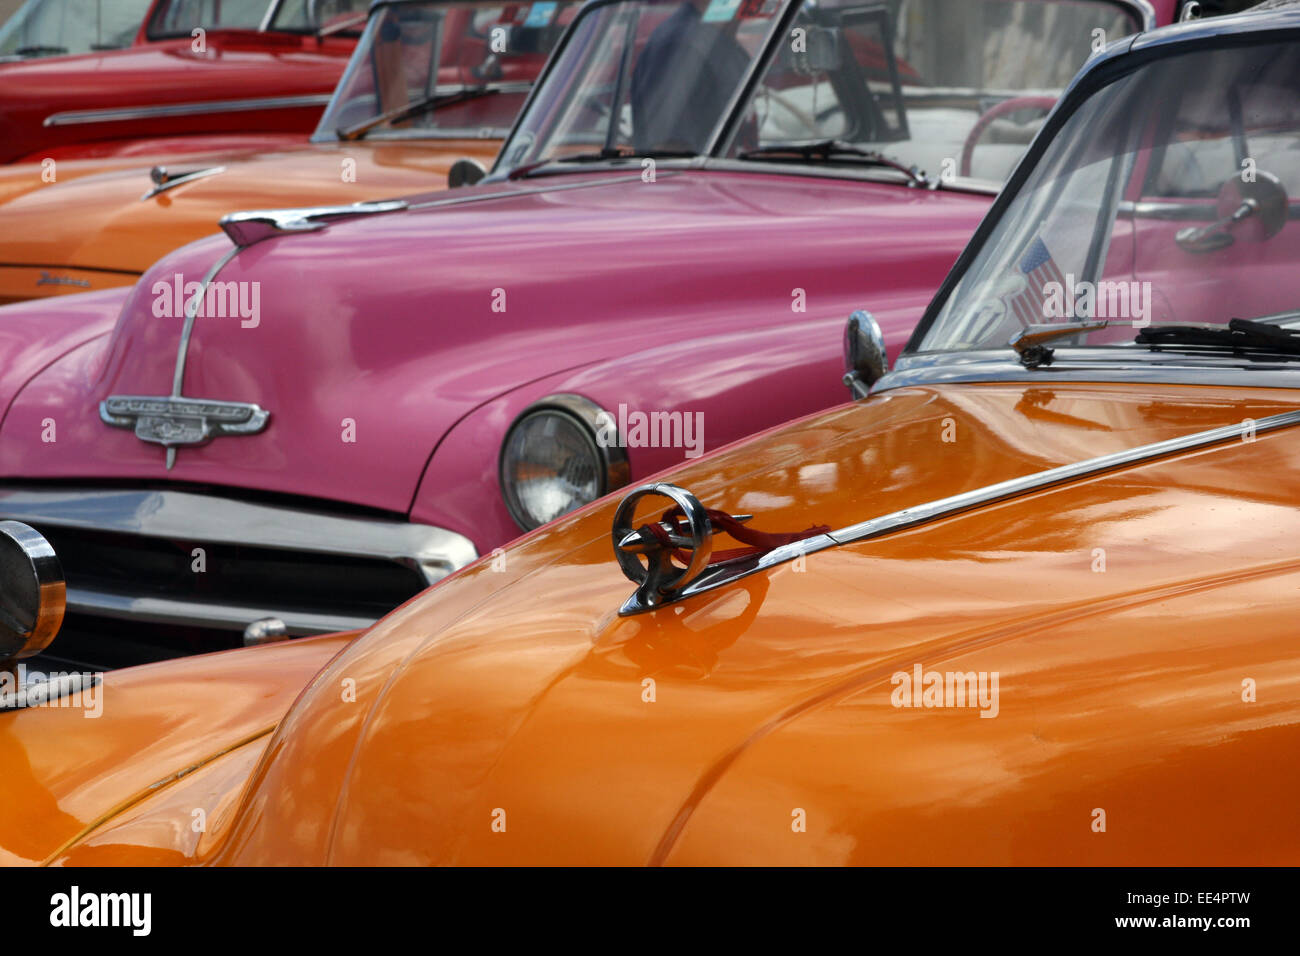 Vintage convertible classic cars parked in Havana in Cuba Stock Photo